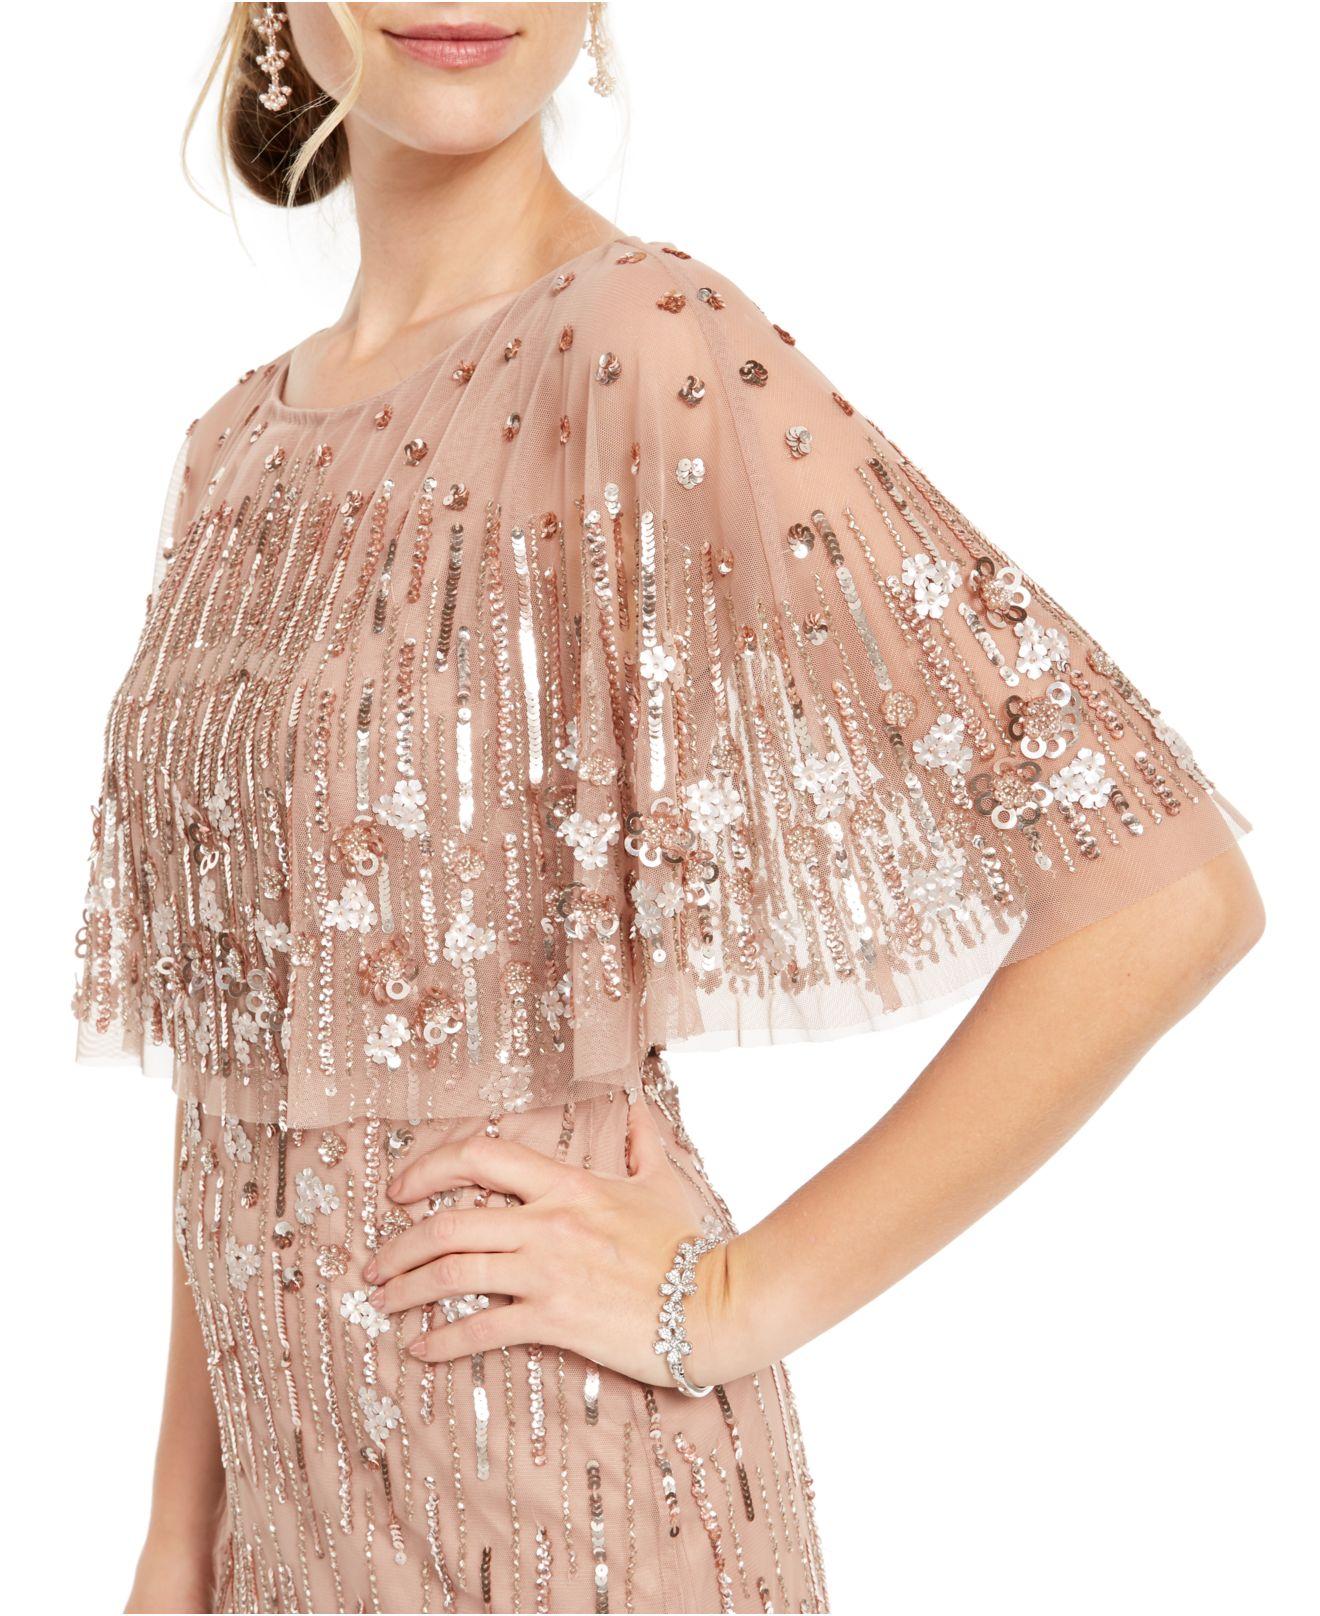 Adrianna Papell Synthetic Beaded Cape Dress in Rose Gold (Pink) | Lyst